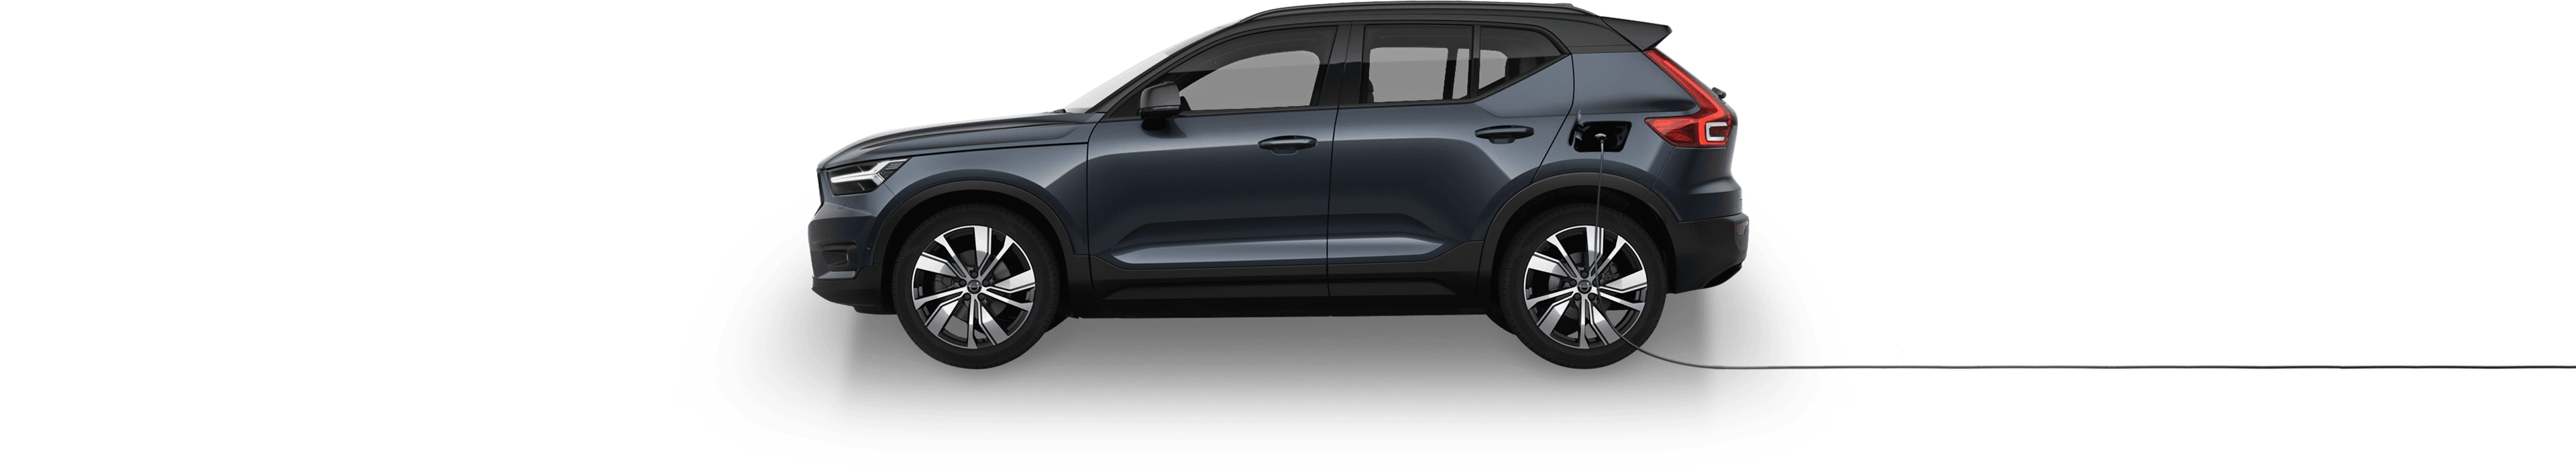 Volvo XC40 Recharge from the side with charger attached.